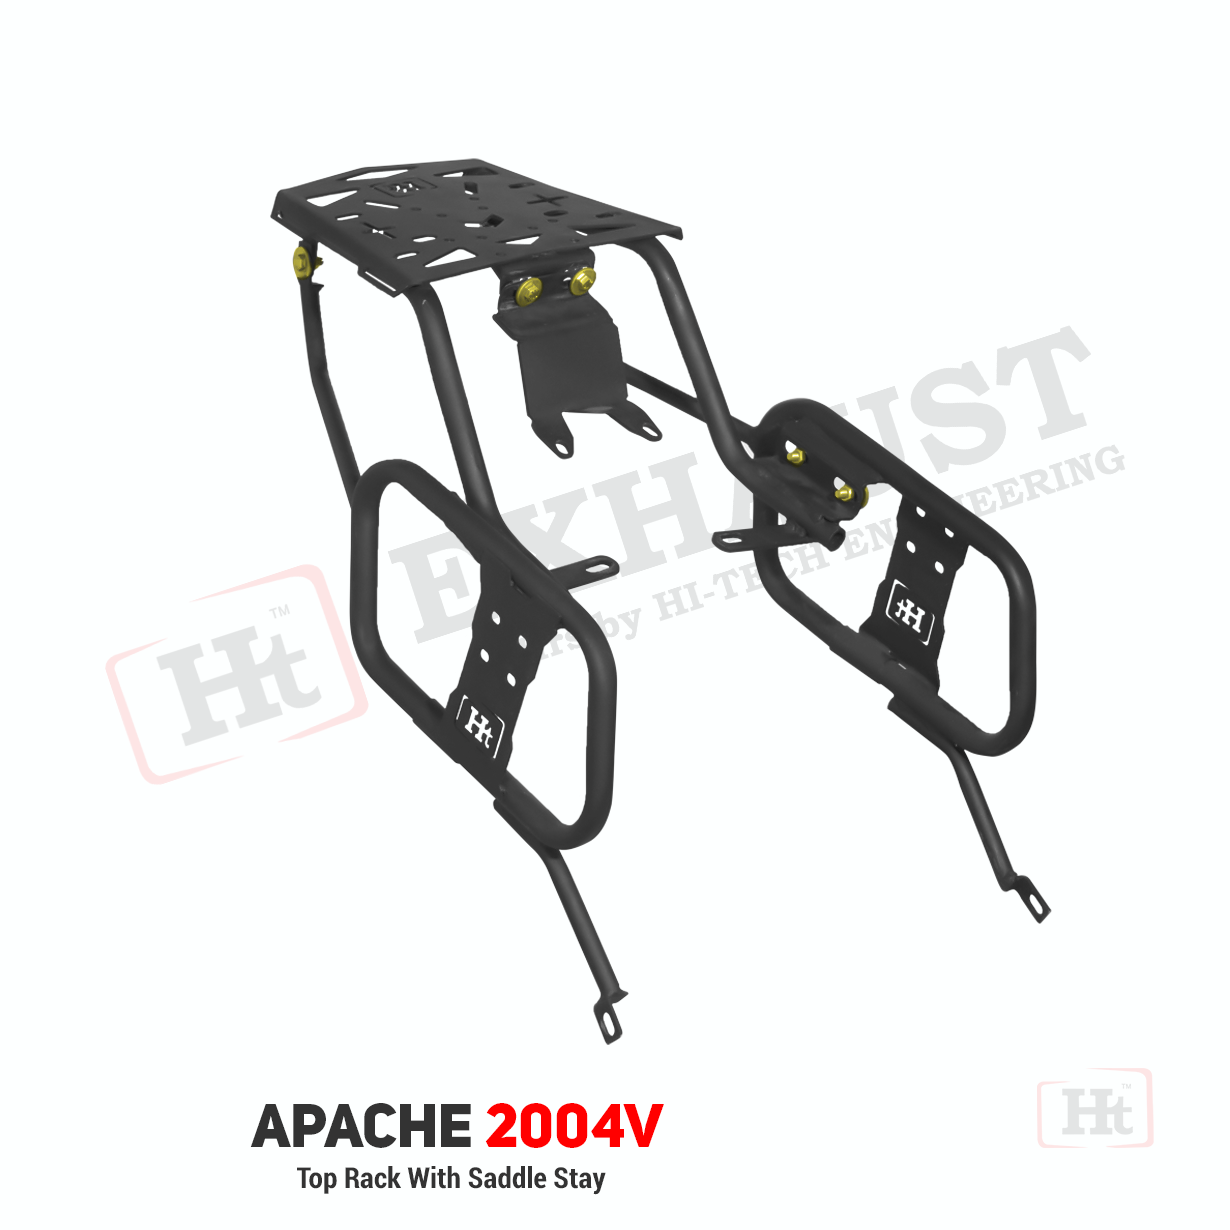 Luggage Carrier For Apache Rtr 160 4v | Luggage Carrier For Apache Rtr 200  4v | Apache Rtr 200 4v Back Carrier – Moto Torque